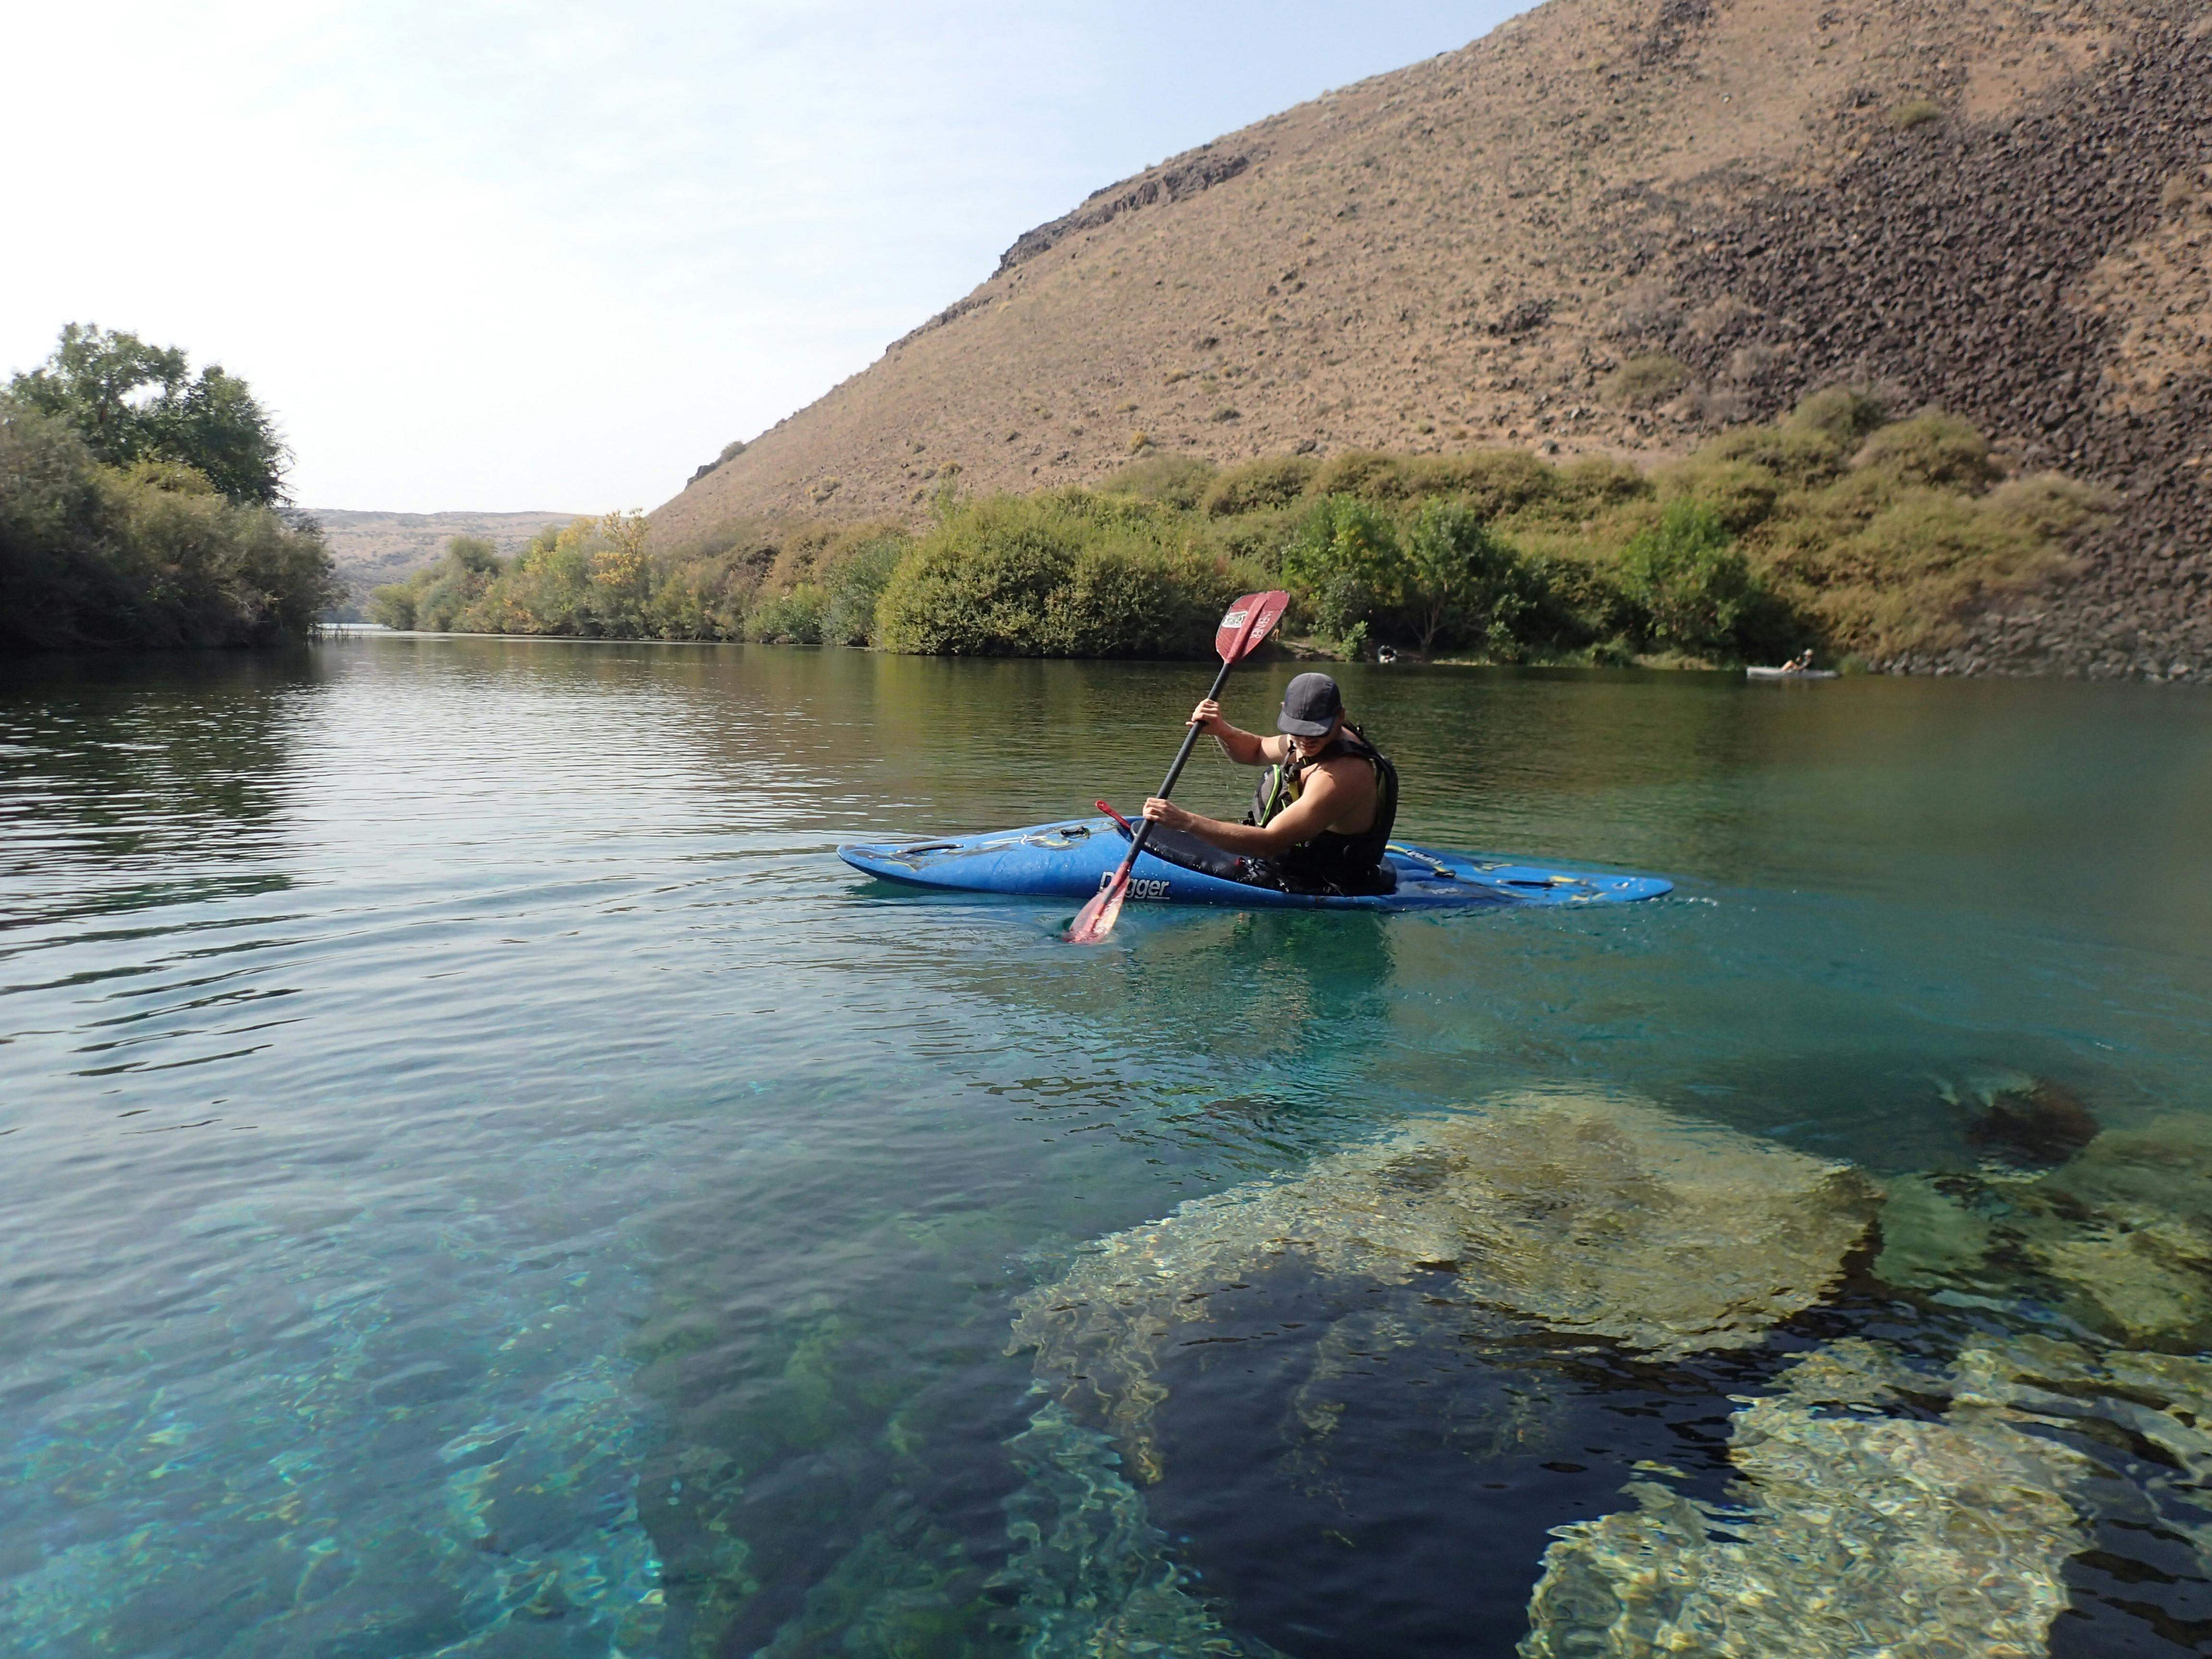 Someone paddles in a blue kayak on clear blue water with brown hills in the background.